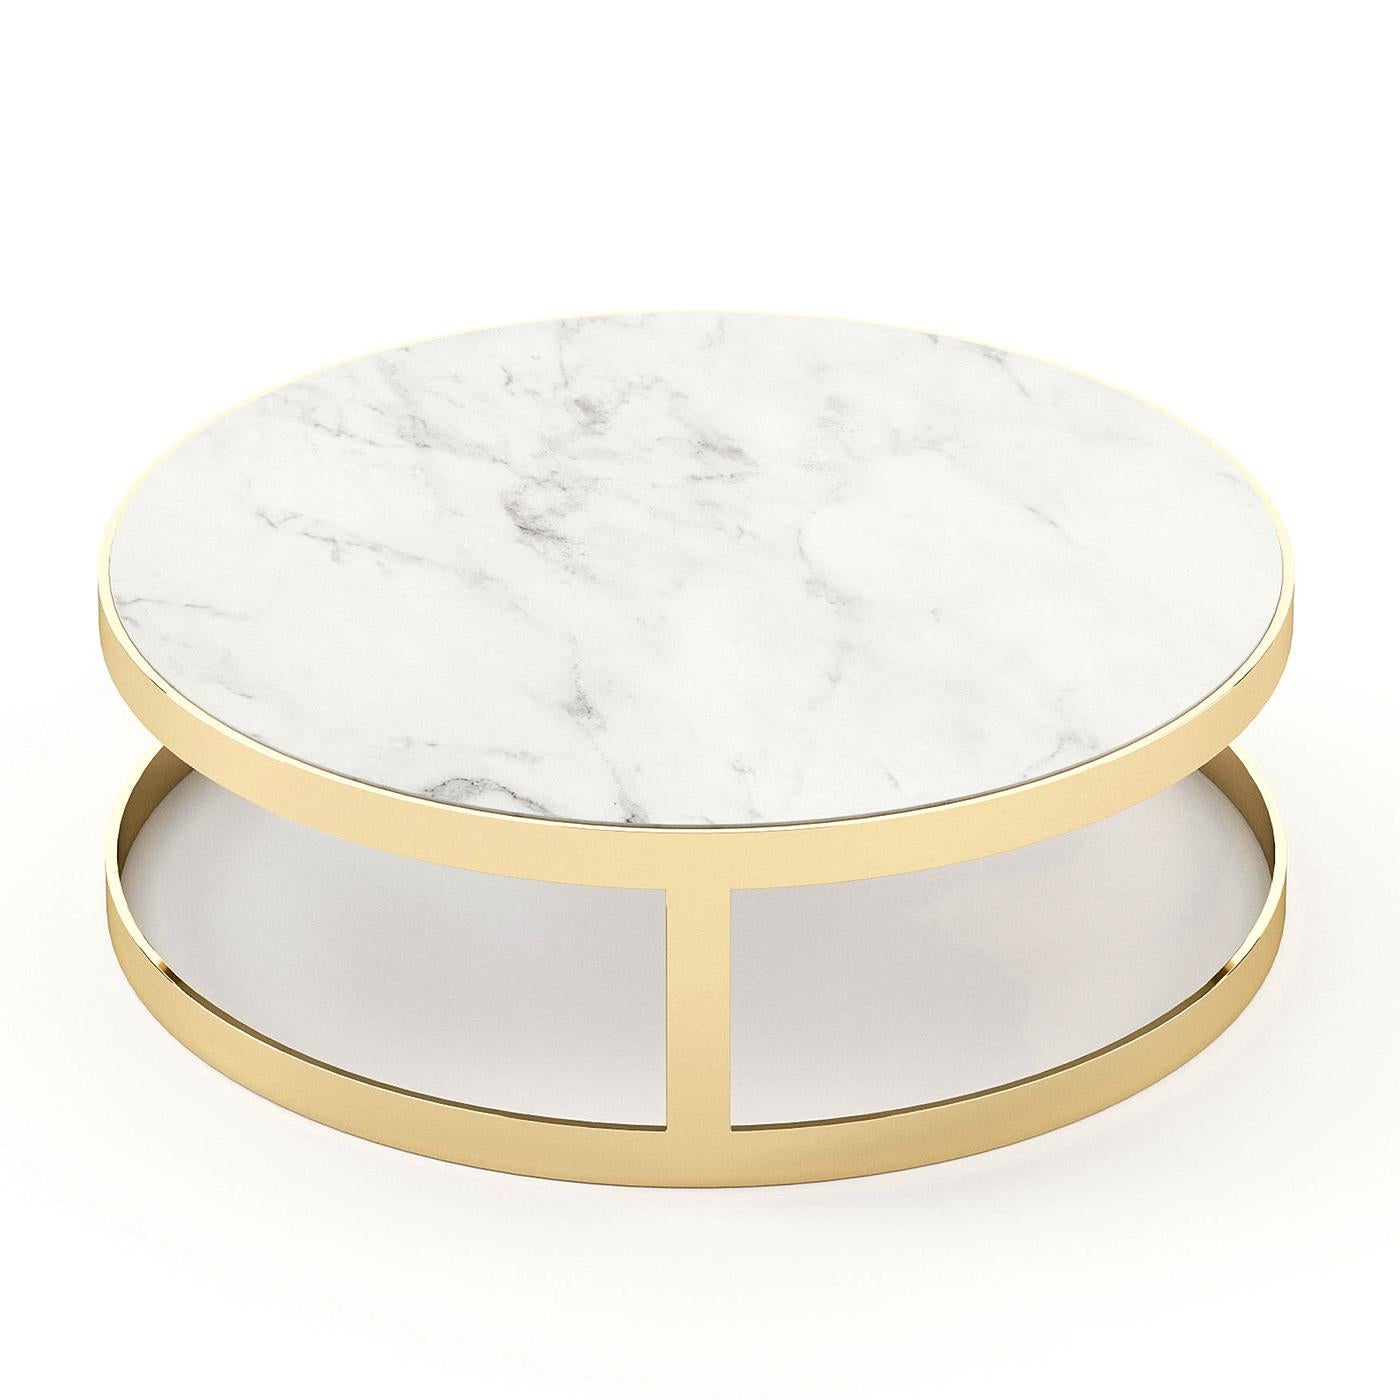 Coffee table Torent 80 with white carrara marble top
and with polished stainless steel base in gold finish.